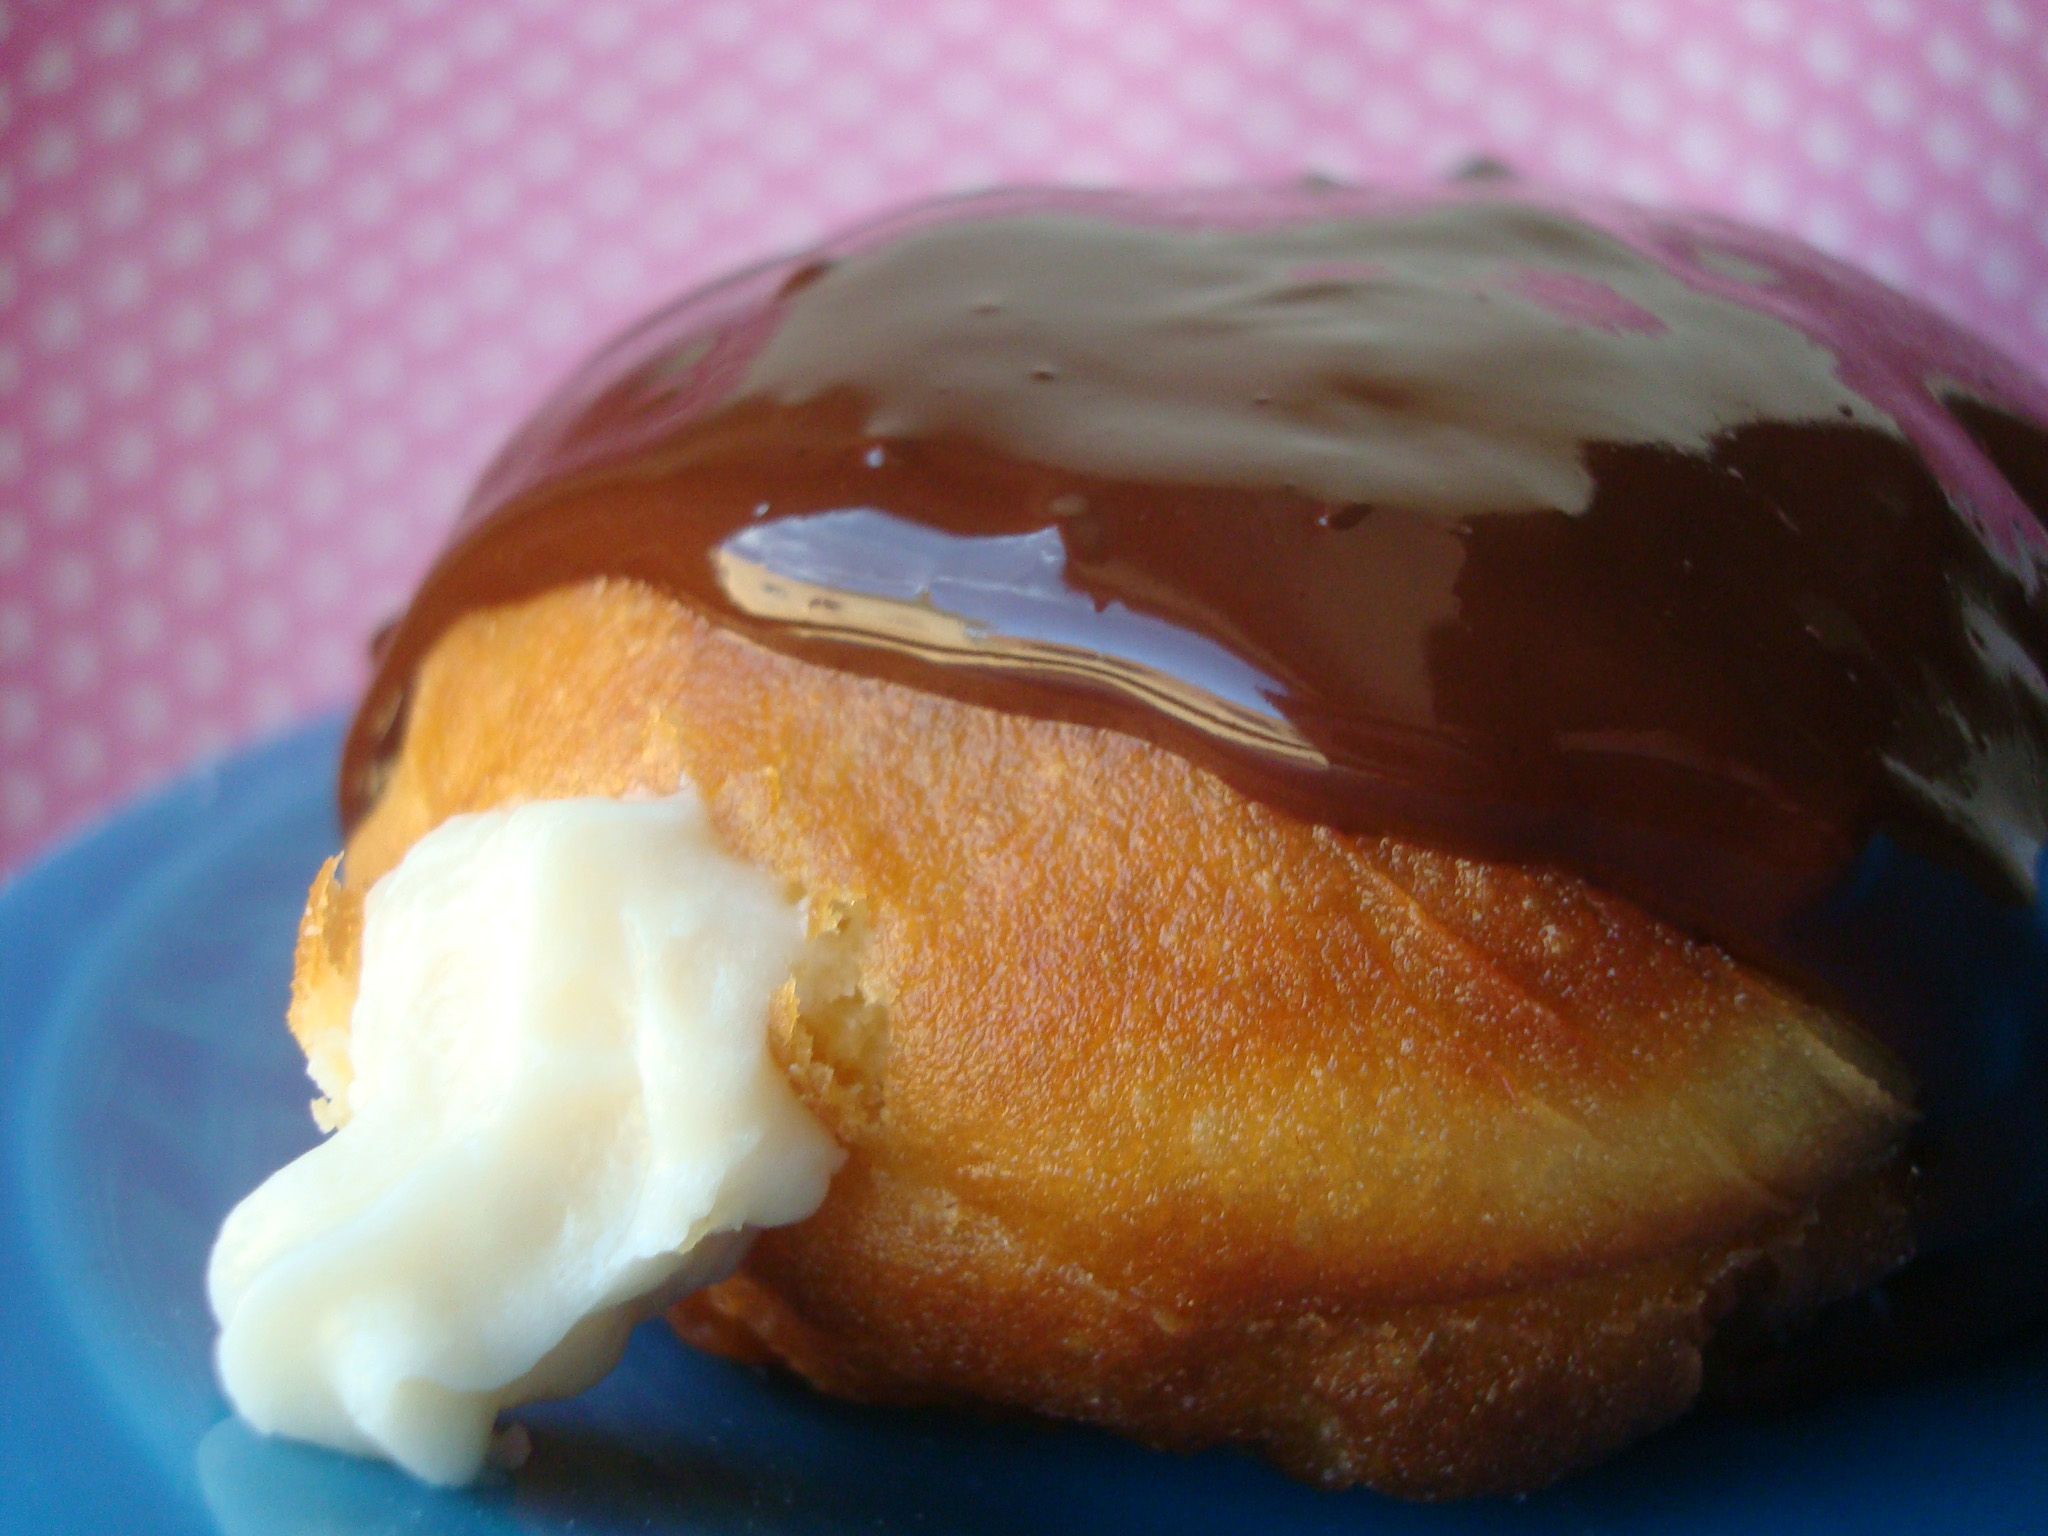 Doughnut with Chocolate Icing and Cream Filling